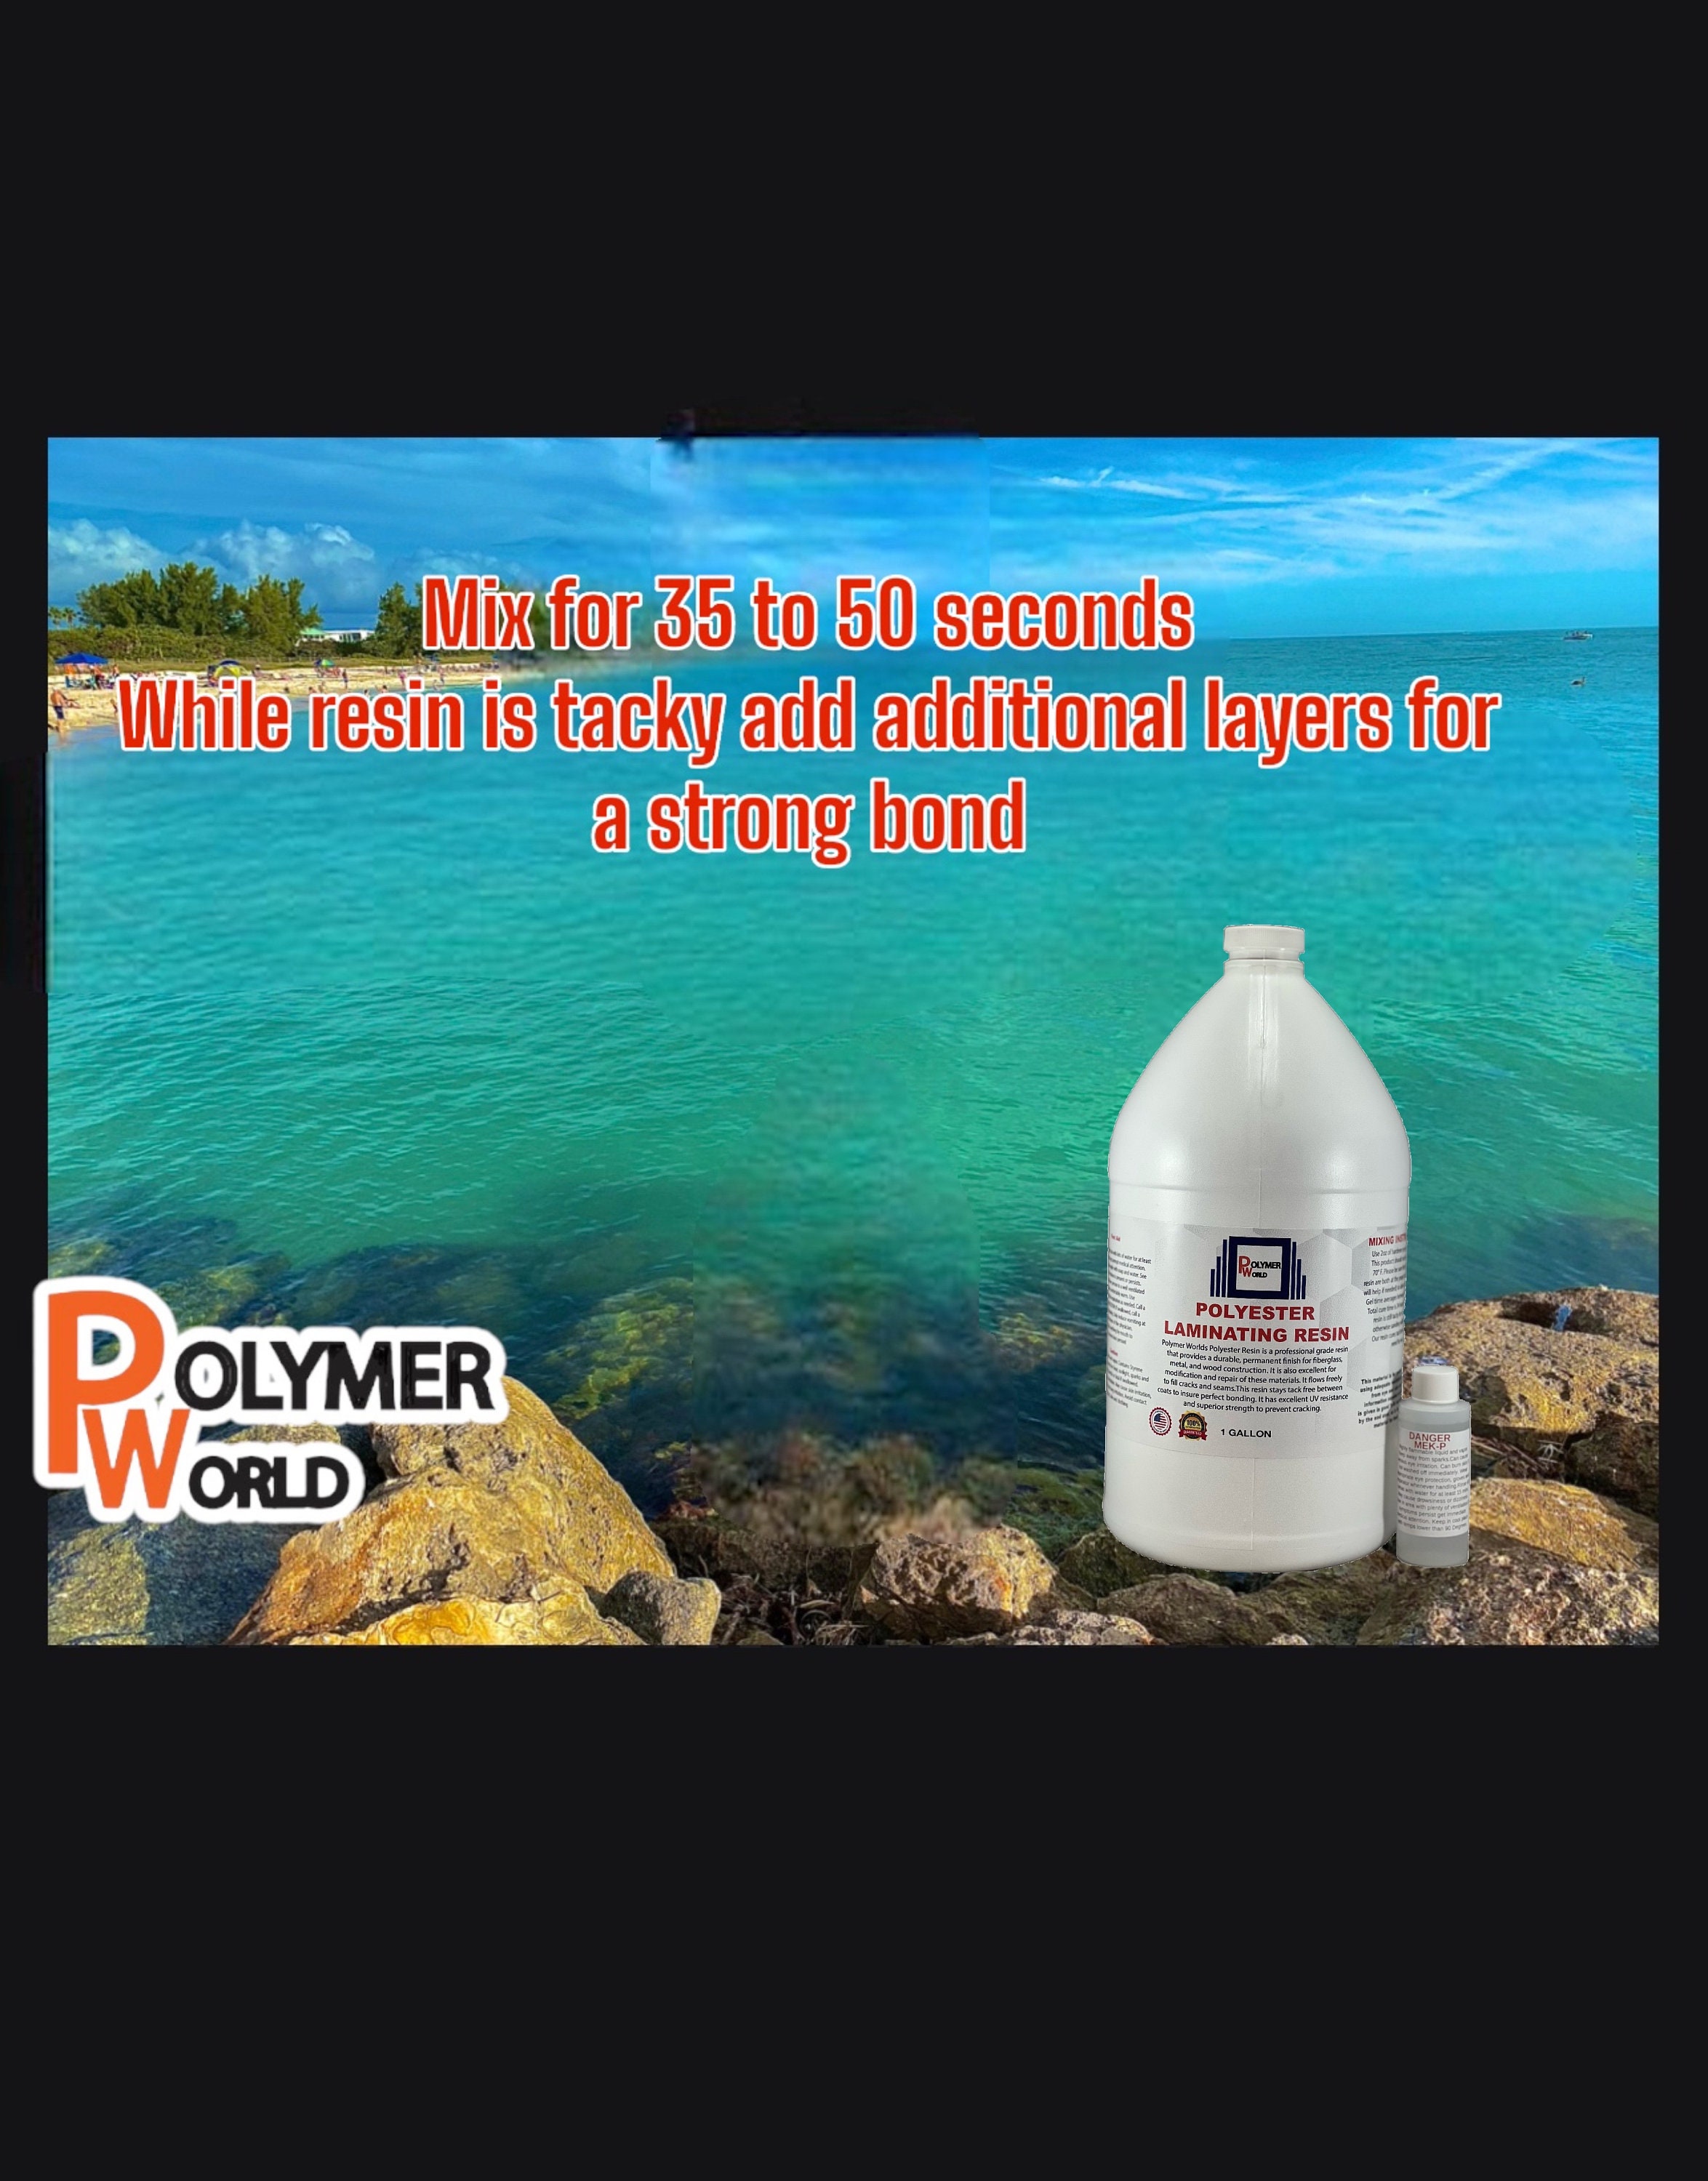 Polymer World Polyester Resin with .75x50x10 Yard Chopped Stand  Mat-Laminating Fiberglass Resin and Hardener Kit for Boat, Automotive, Bath